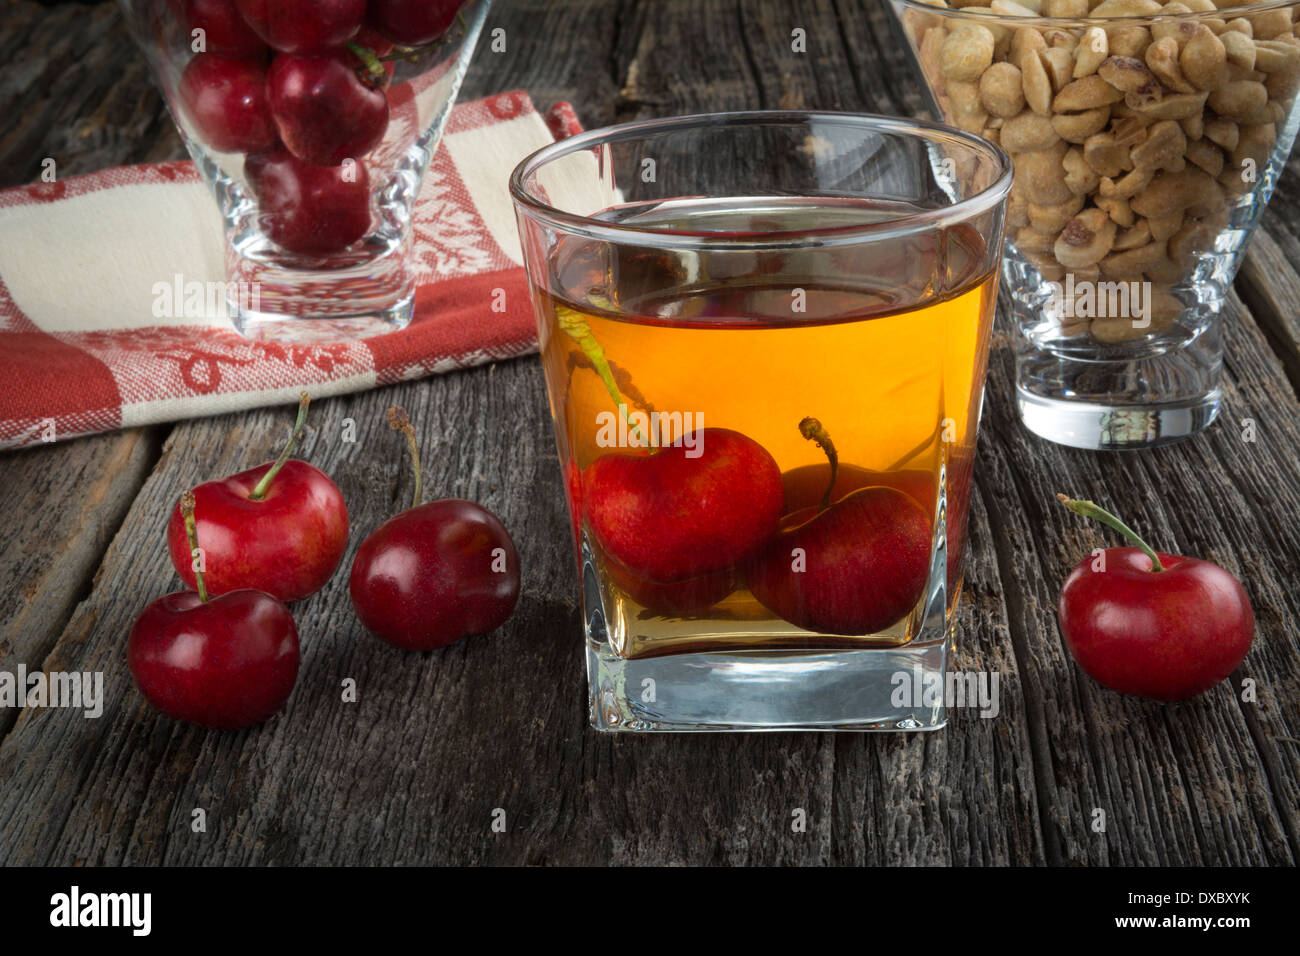 Manhattan or other whiskey cocktail, with cherries submerged and cherries and peanuts next to it Stock Photo